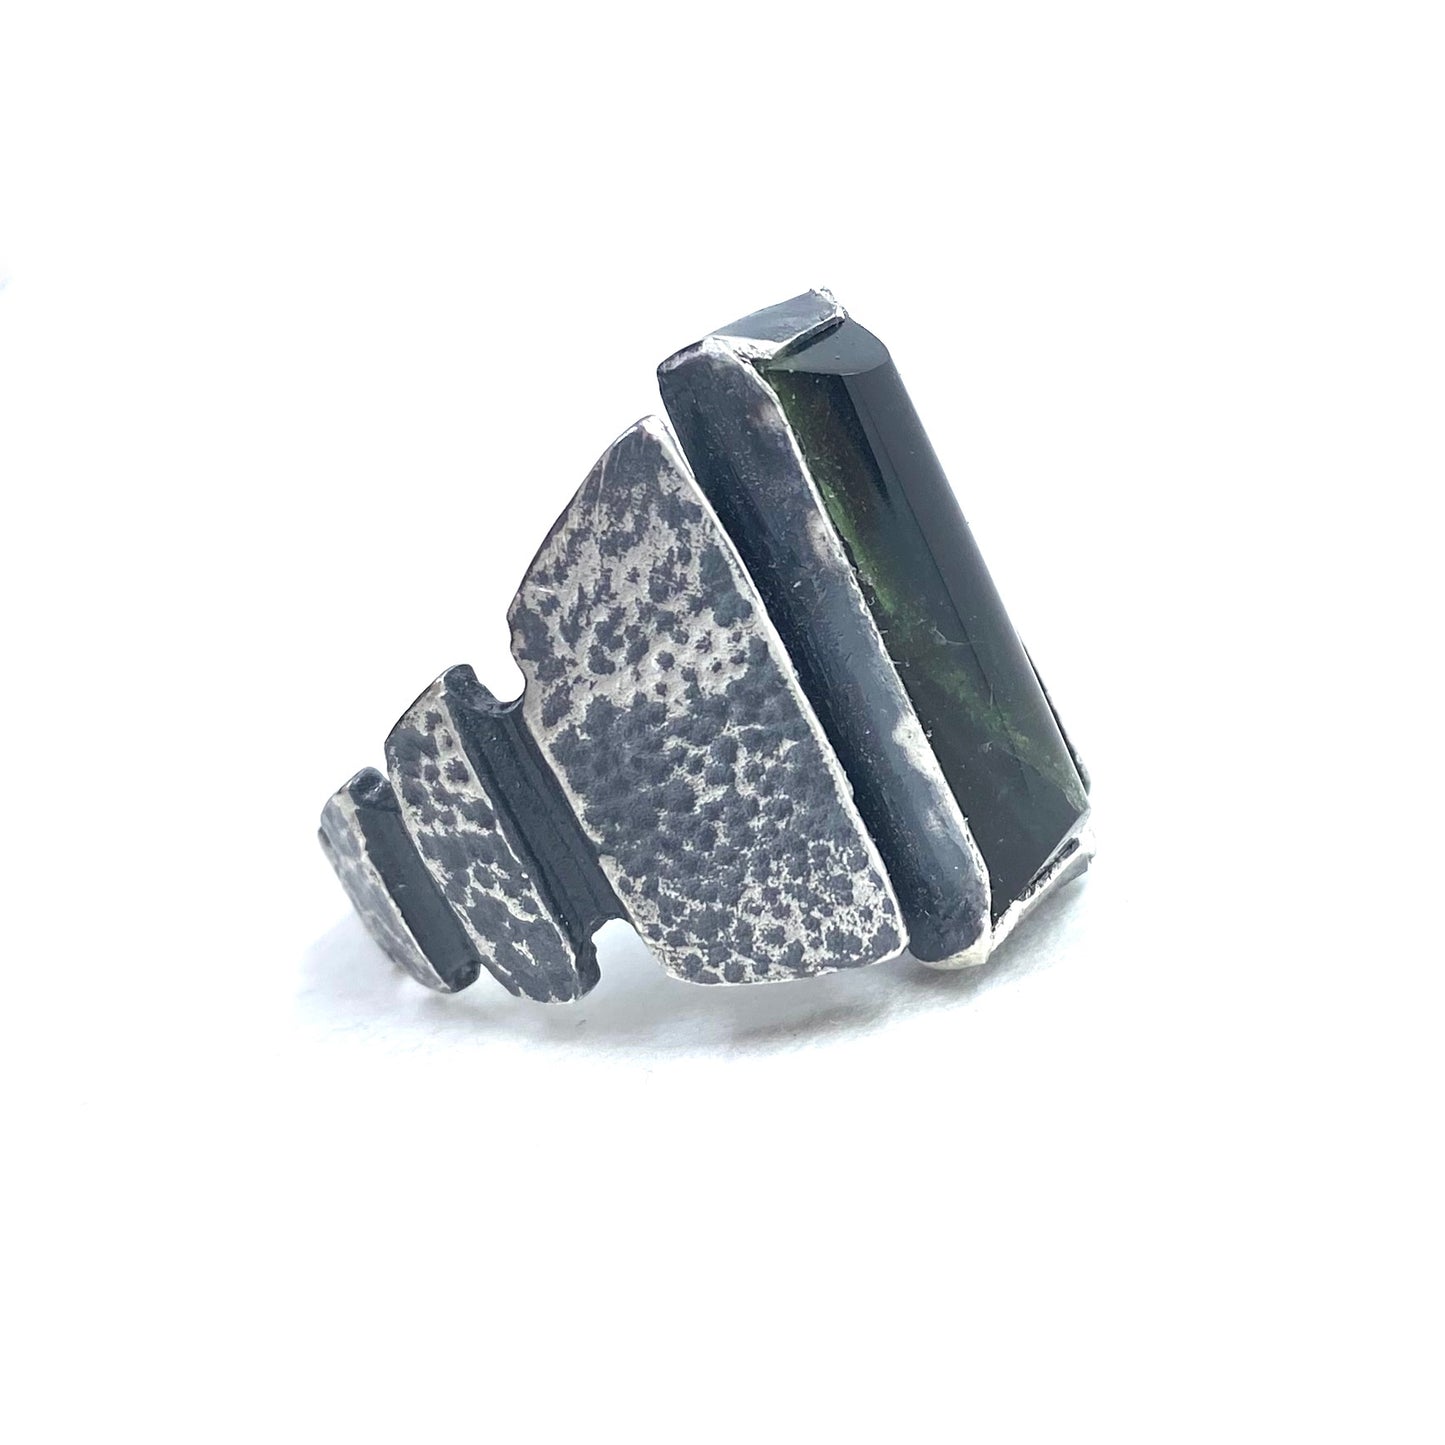 Brutalist Ring with Green Tourmaline in Sterling Silver